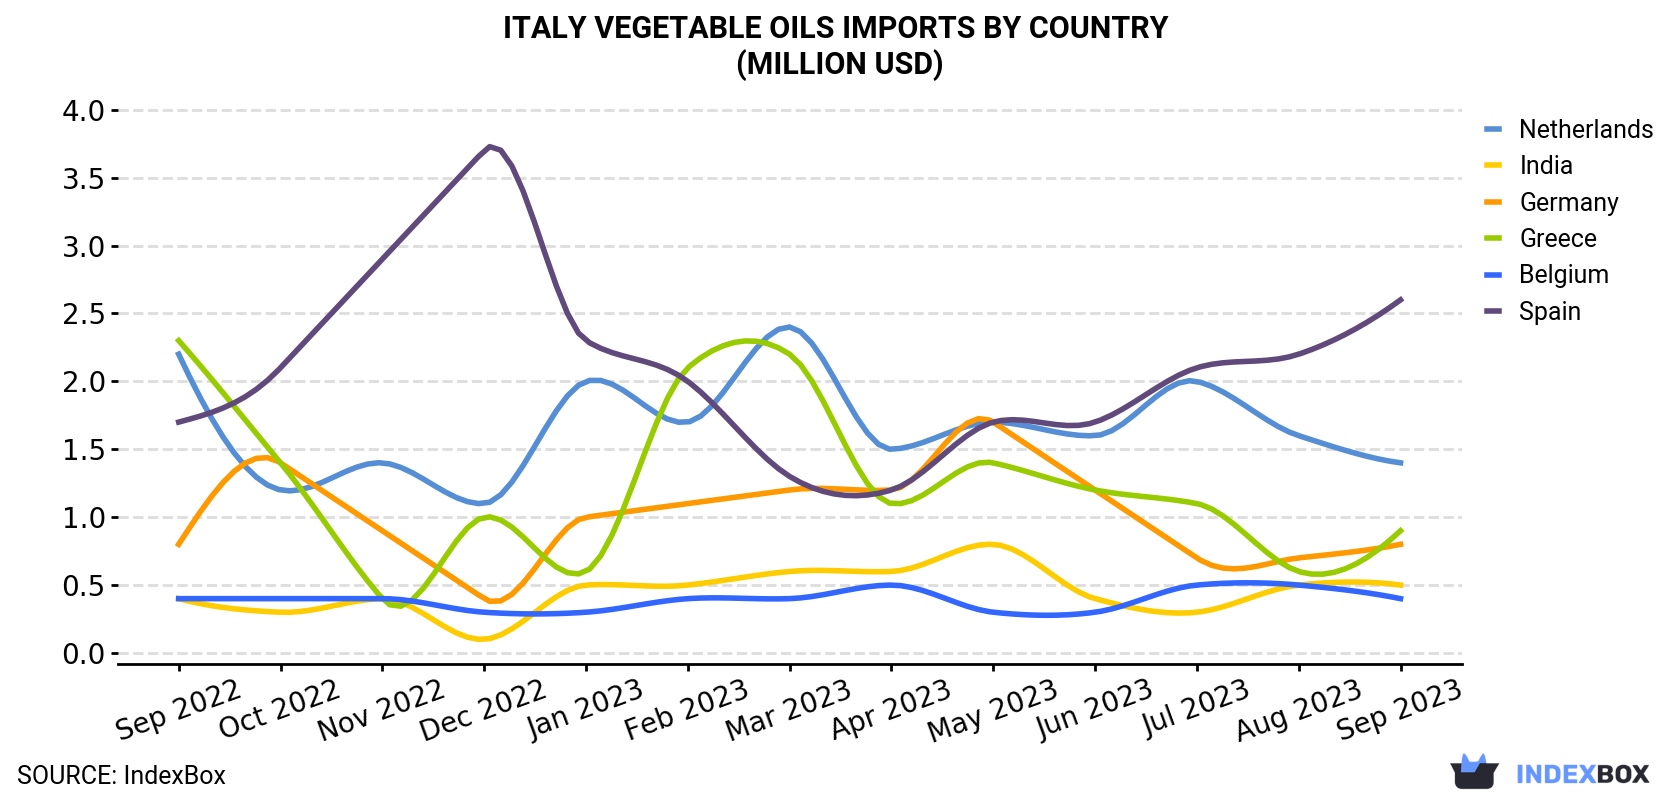 Italy Vegetable Oils Imports By Country (Million USD)